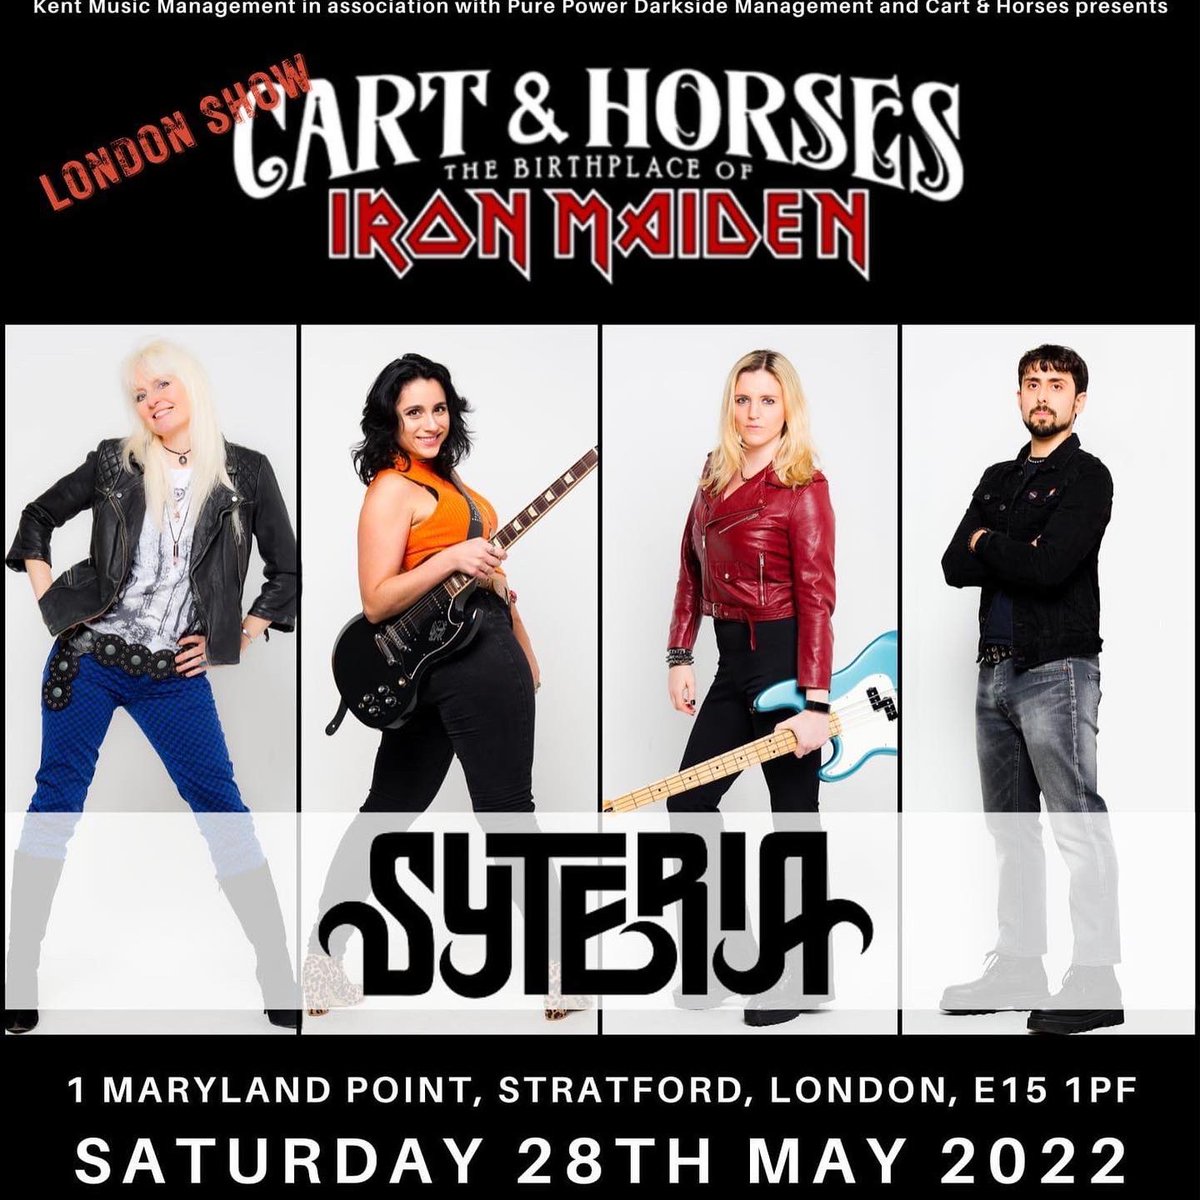 #Sheffield and #London! Here we come! 🤘 #syteria #syteriaband #livemusic #rockandroll #supportlivemusic #supportlivemusicvenues #corporationsheffield #cartandhorseslondon